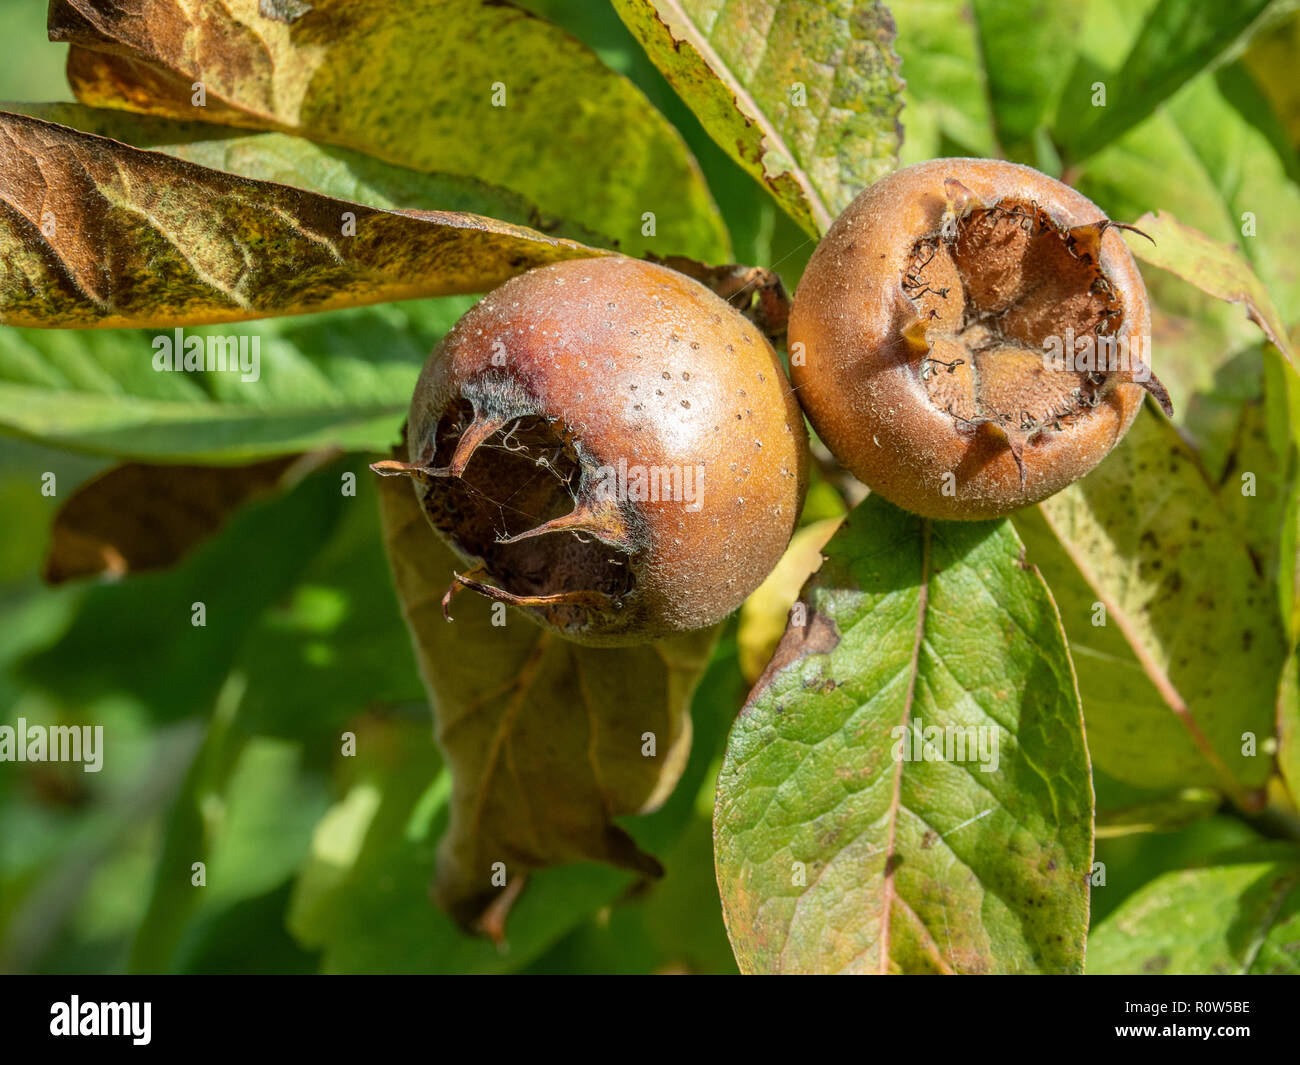 A close up of two ripe medlar (Mespilus germanica) fruits against a backgroud of leaves Stock Photo